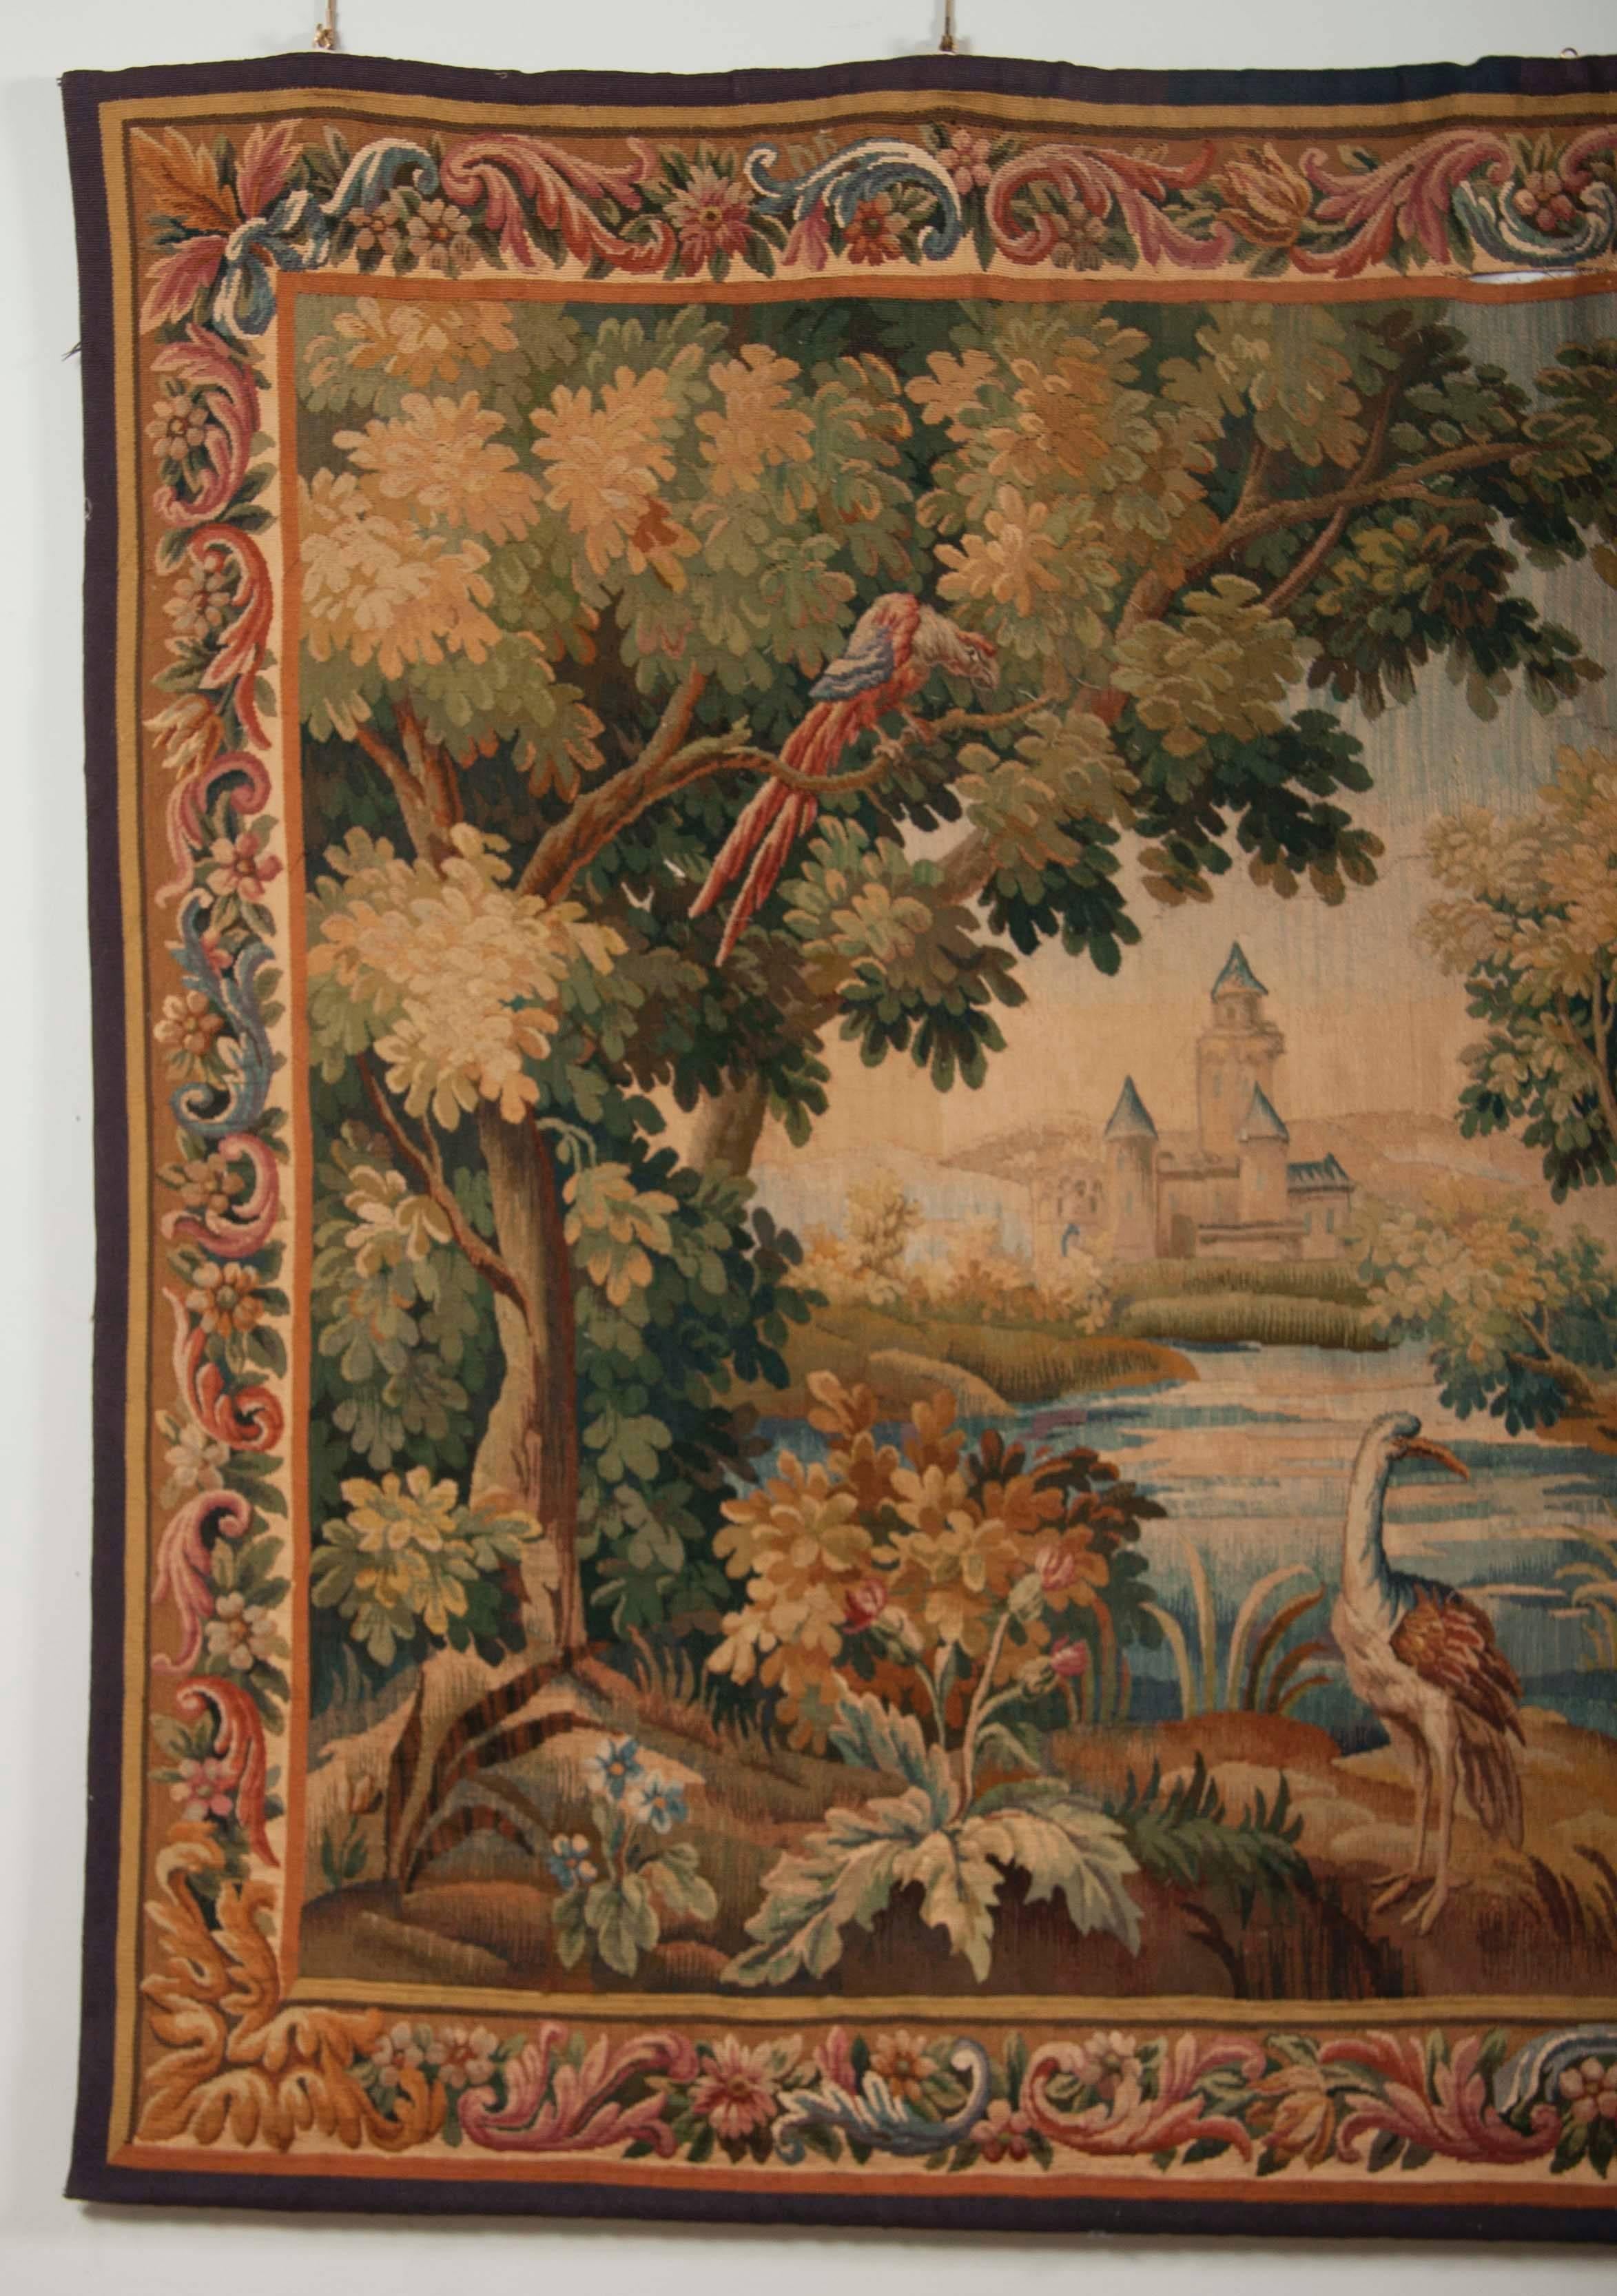 A French Aubusson tapestry with a pastoral landscape scene, in excellent condition from the late 18th or early 19th century.